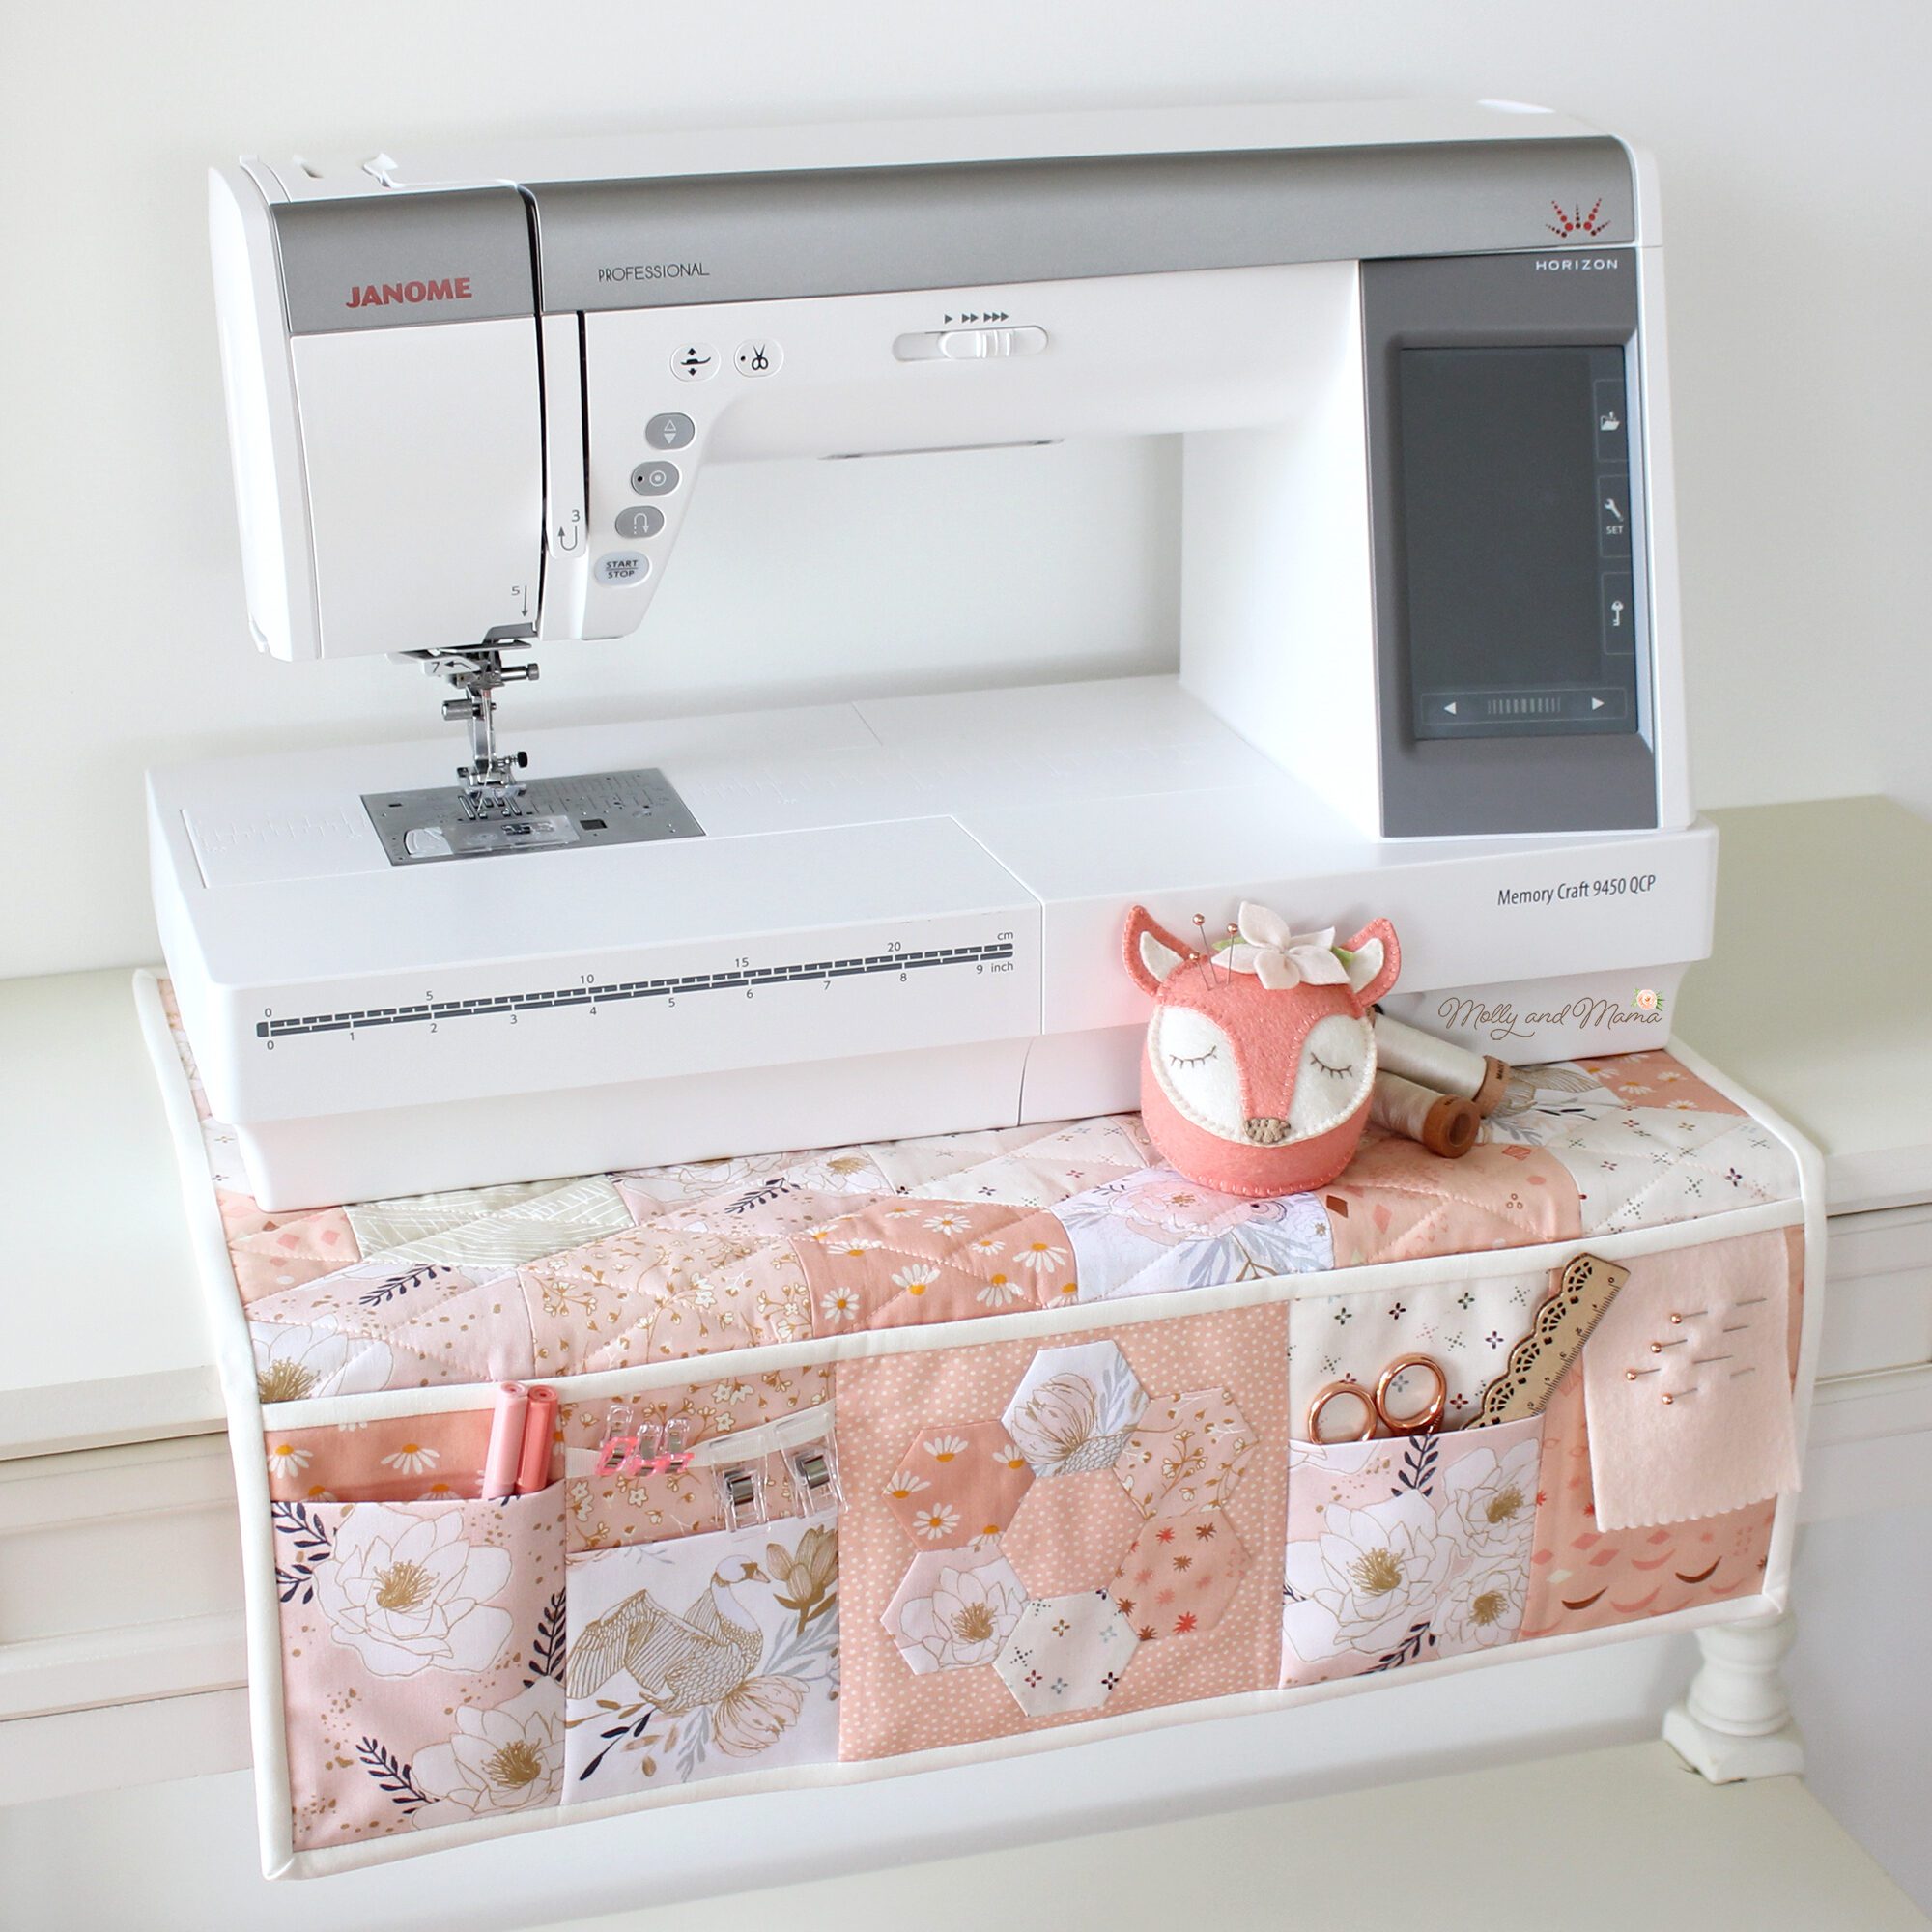 Quilted Sewing Machine Mat Pattern